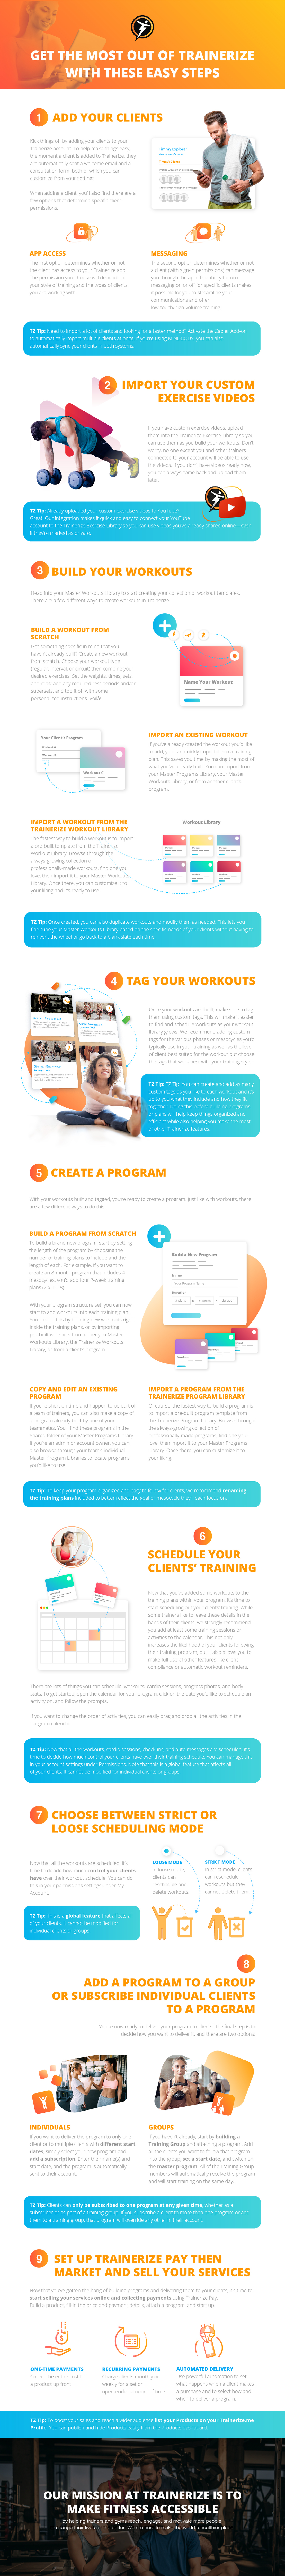 Use this Step-by-Step Infographic to Get the Most out of Trainerize